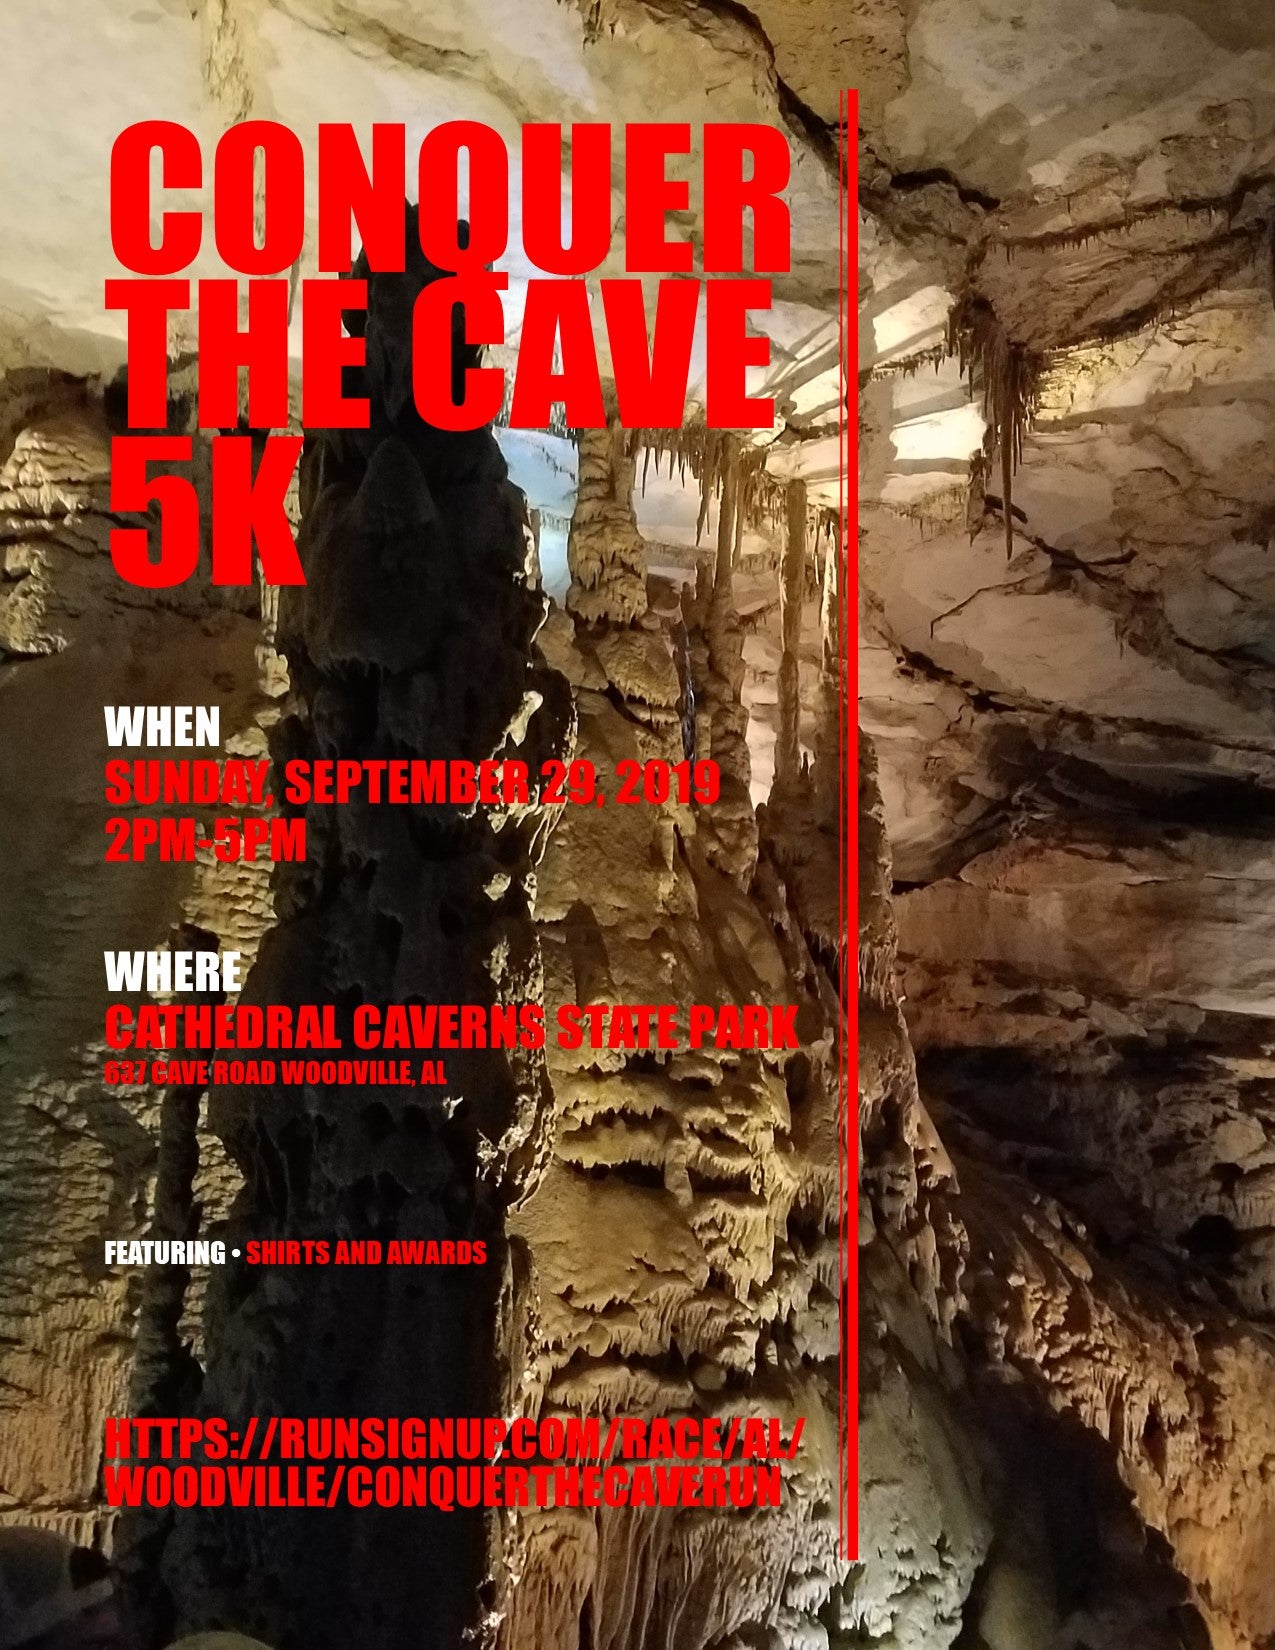 Conquer the Cave 5k Cathedral Caverns State Park